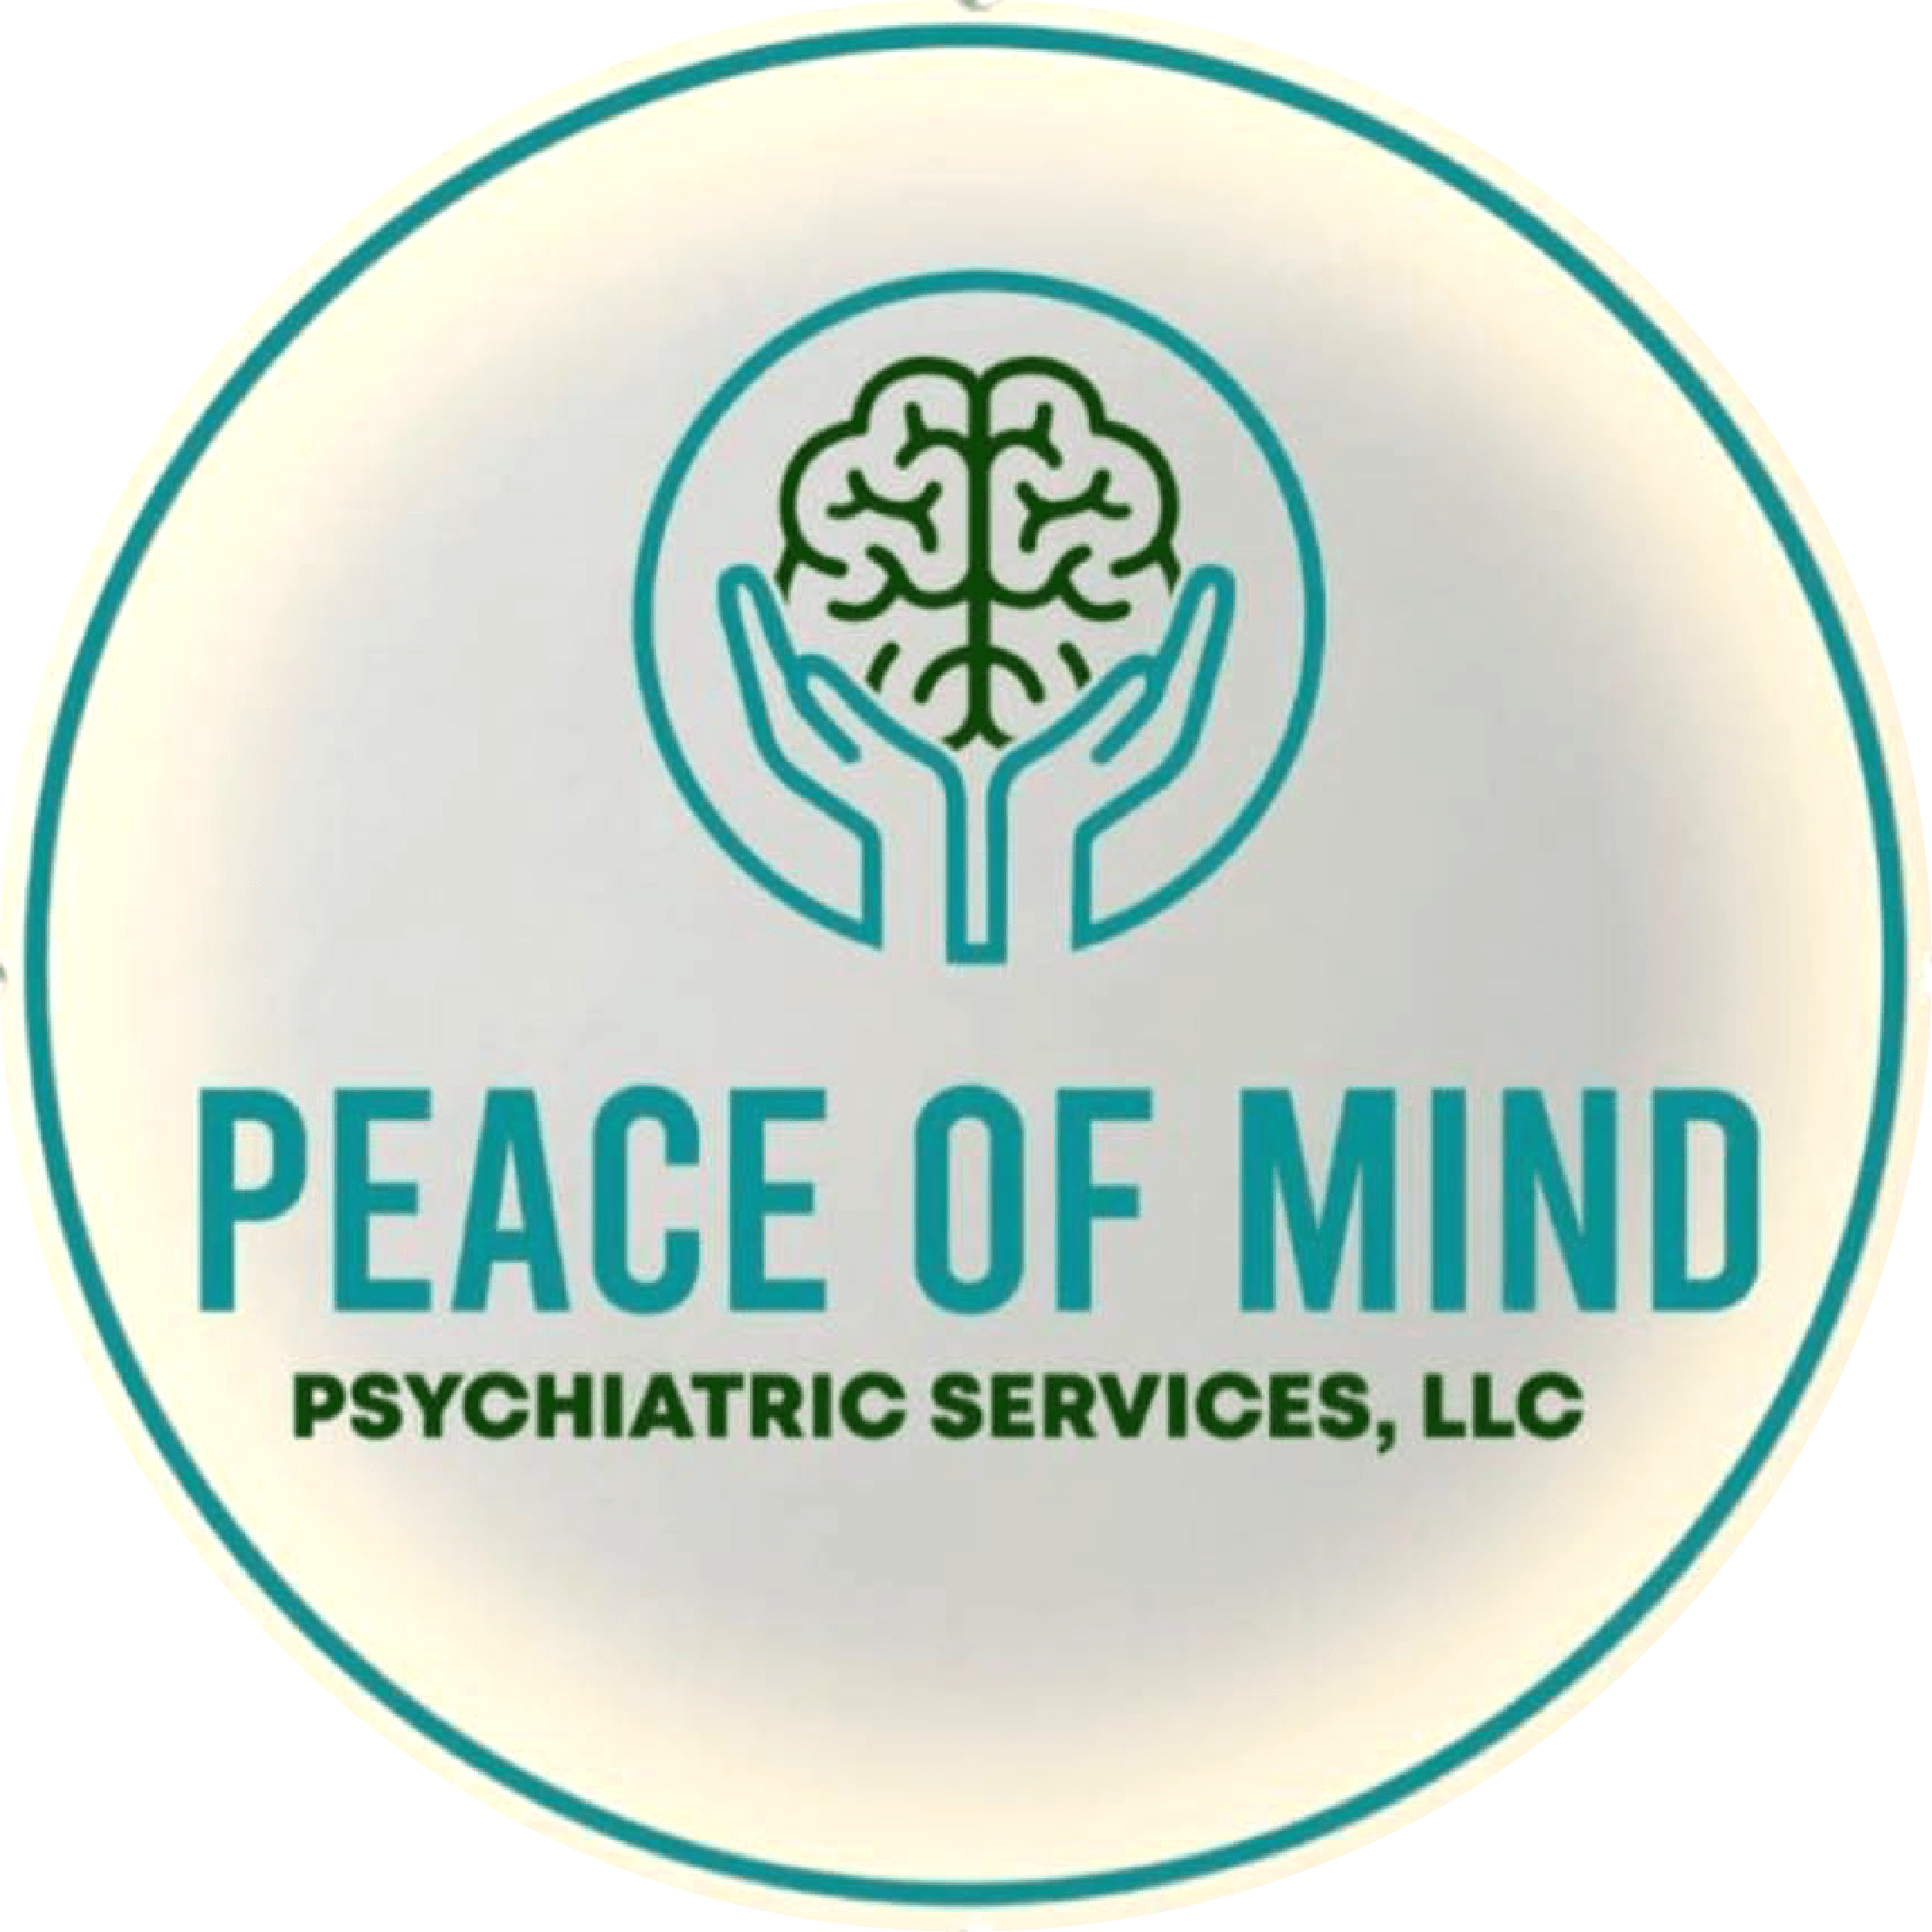 Peace of Mind Psychiatric Services, LLC